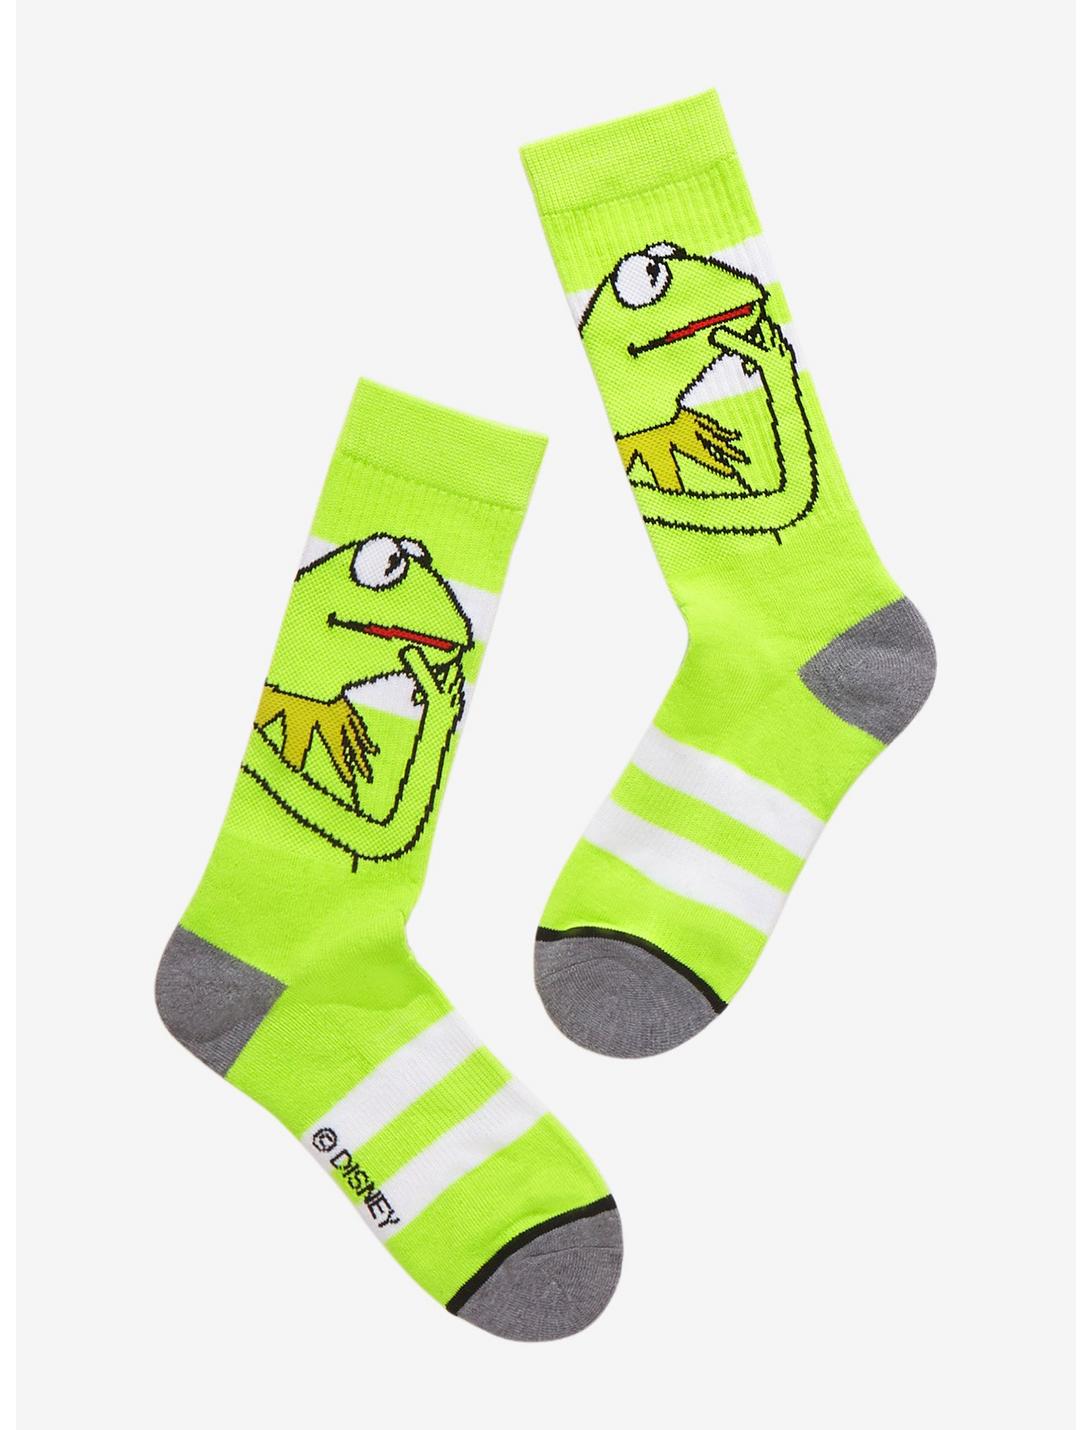 The Muppets Kermit The Frog Thinking Crew Socks, , hi-res